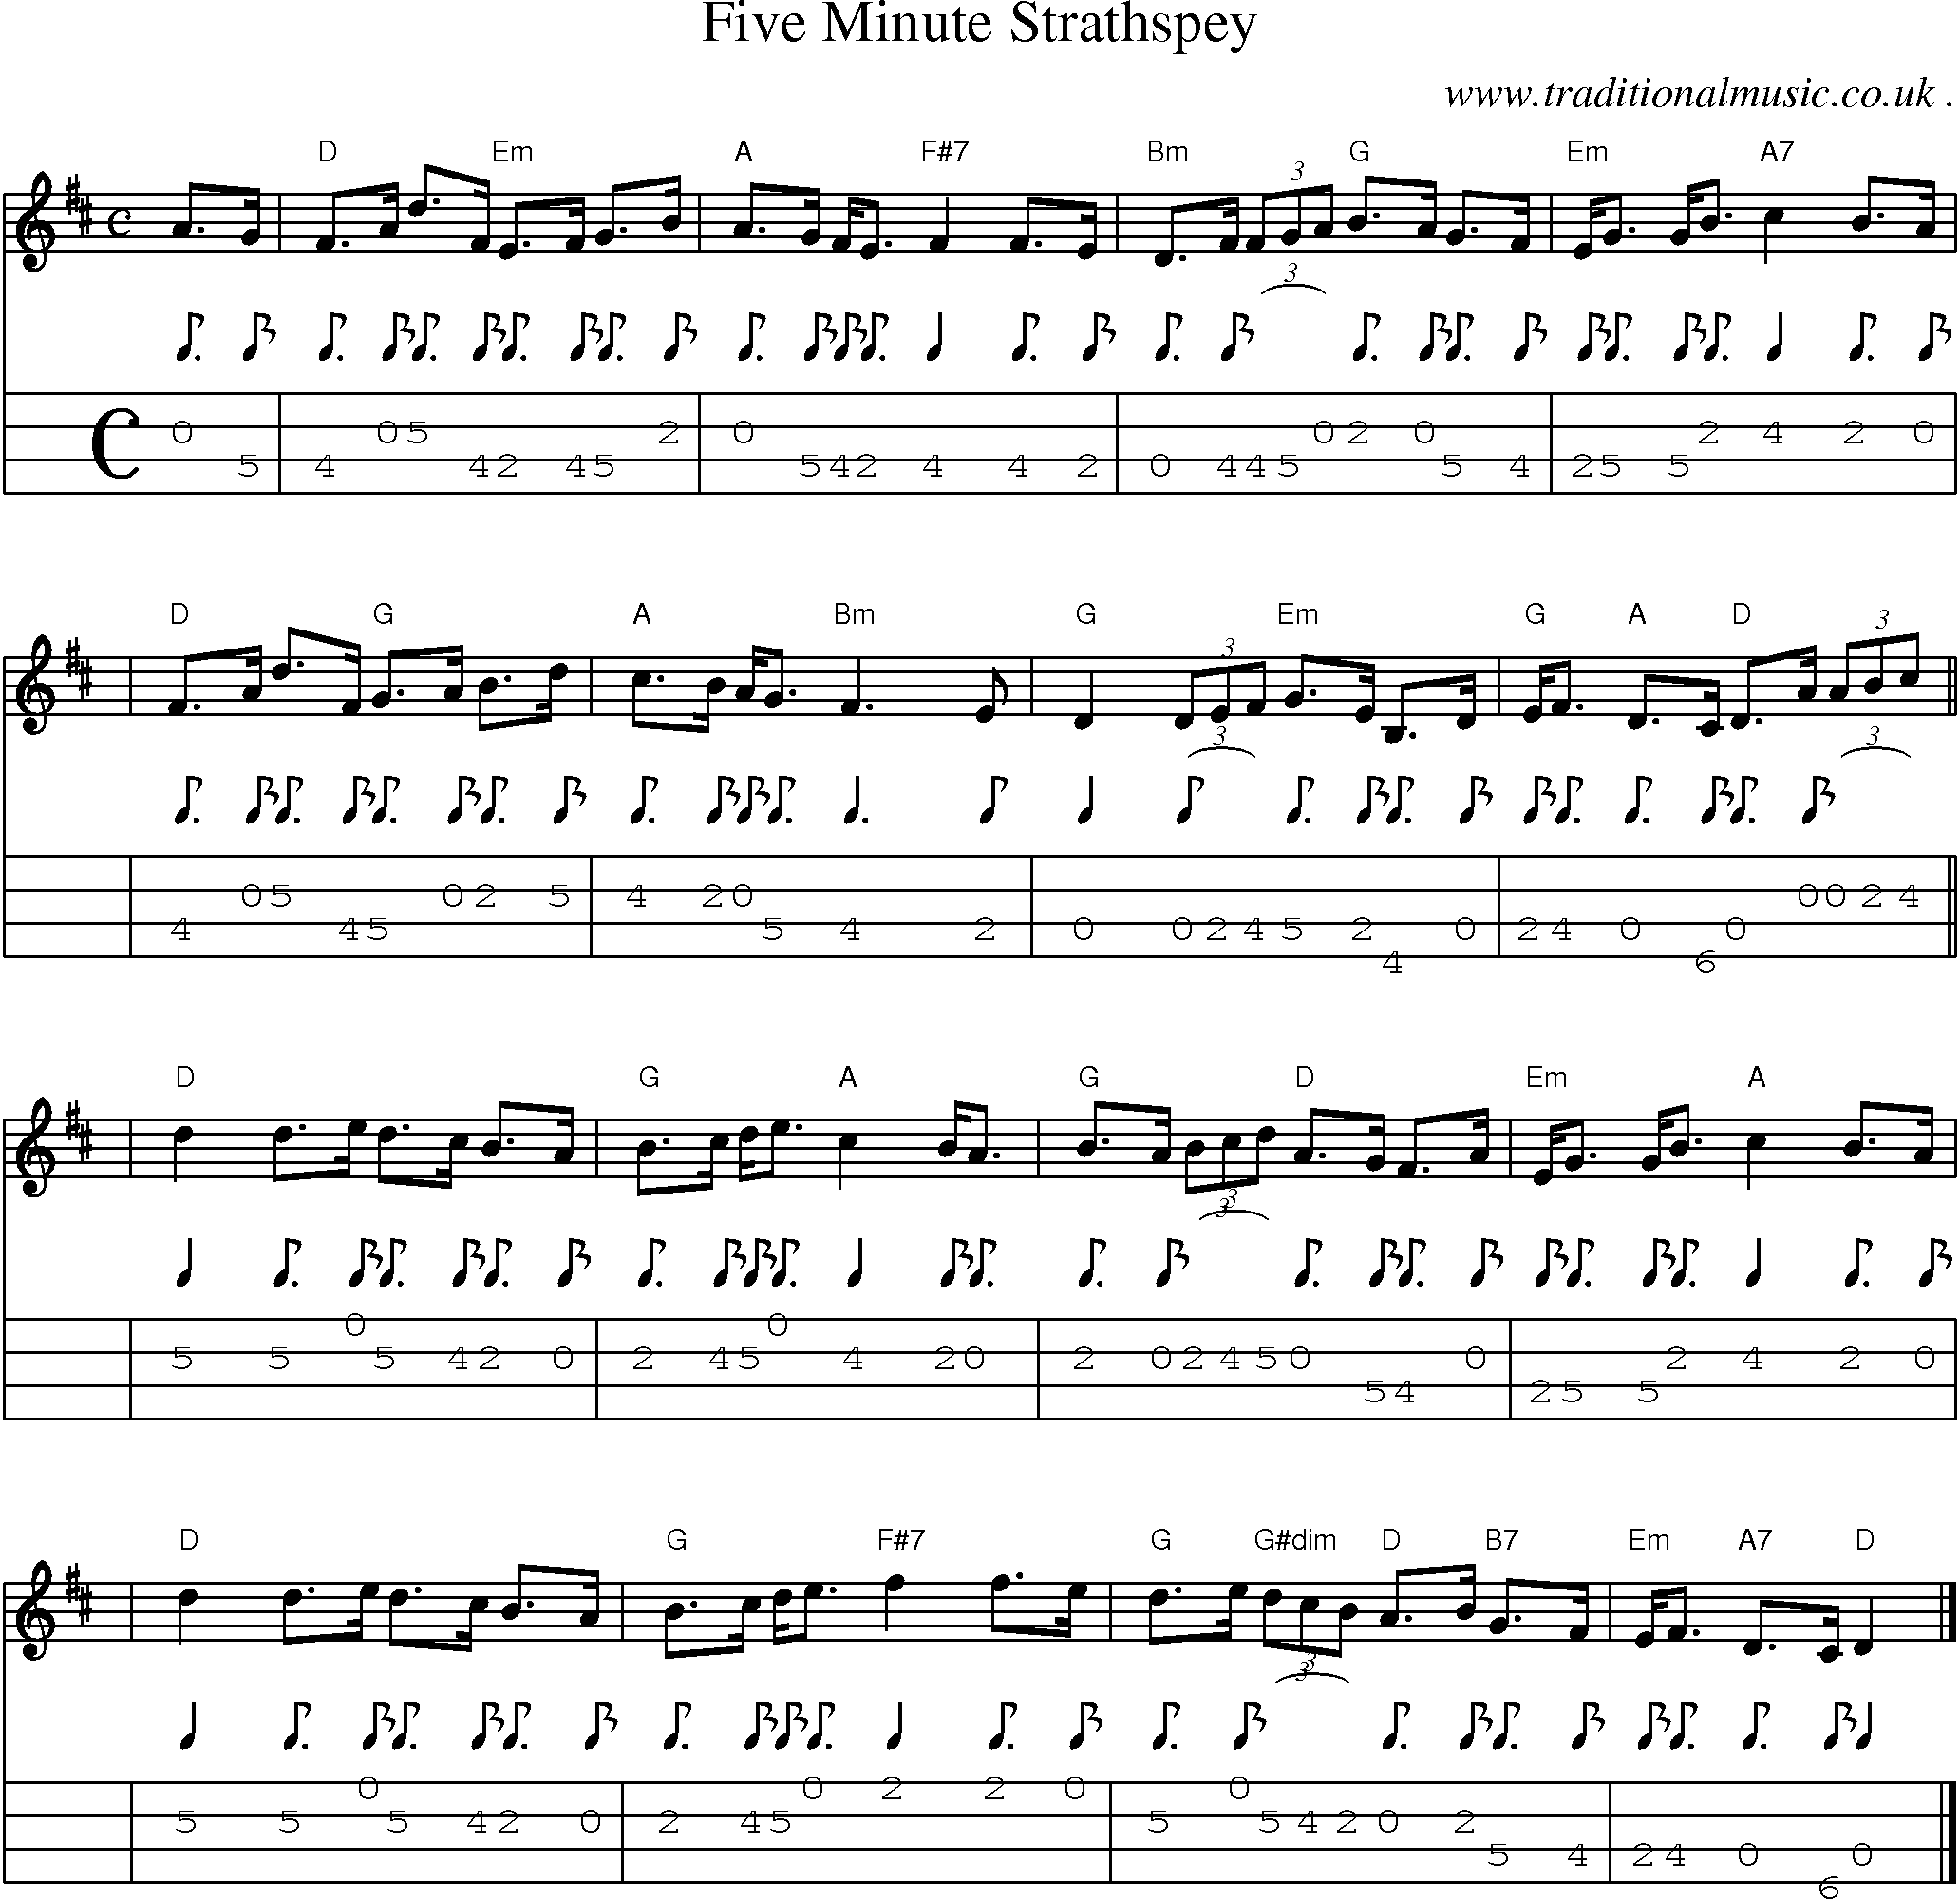 Sheet-music  score, Chords and Mandolin Tabs for Five Minute Strathspey